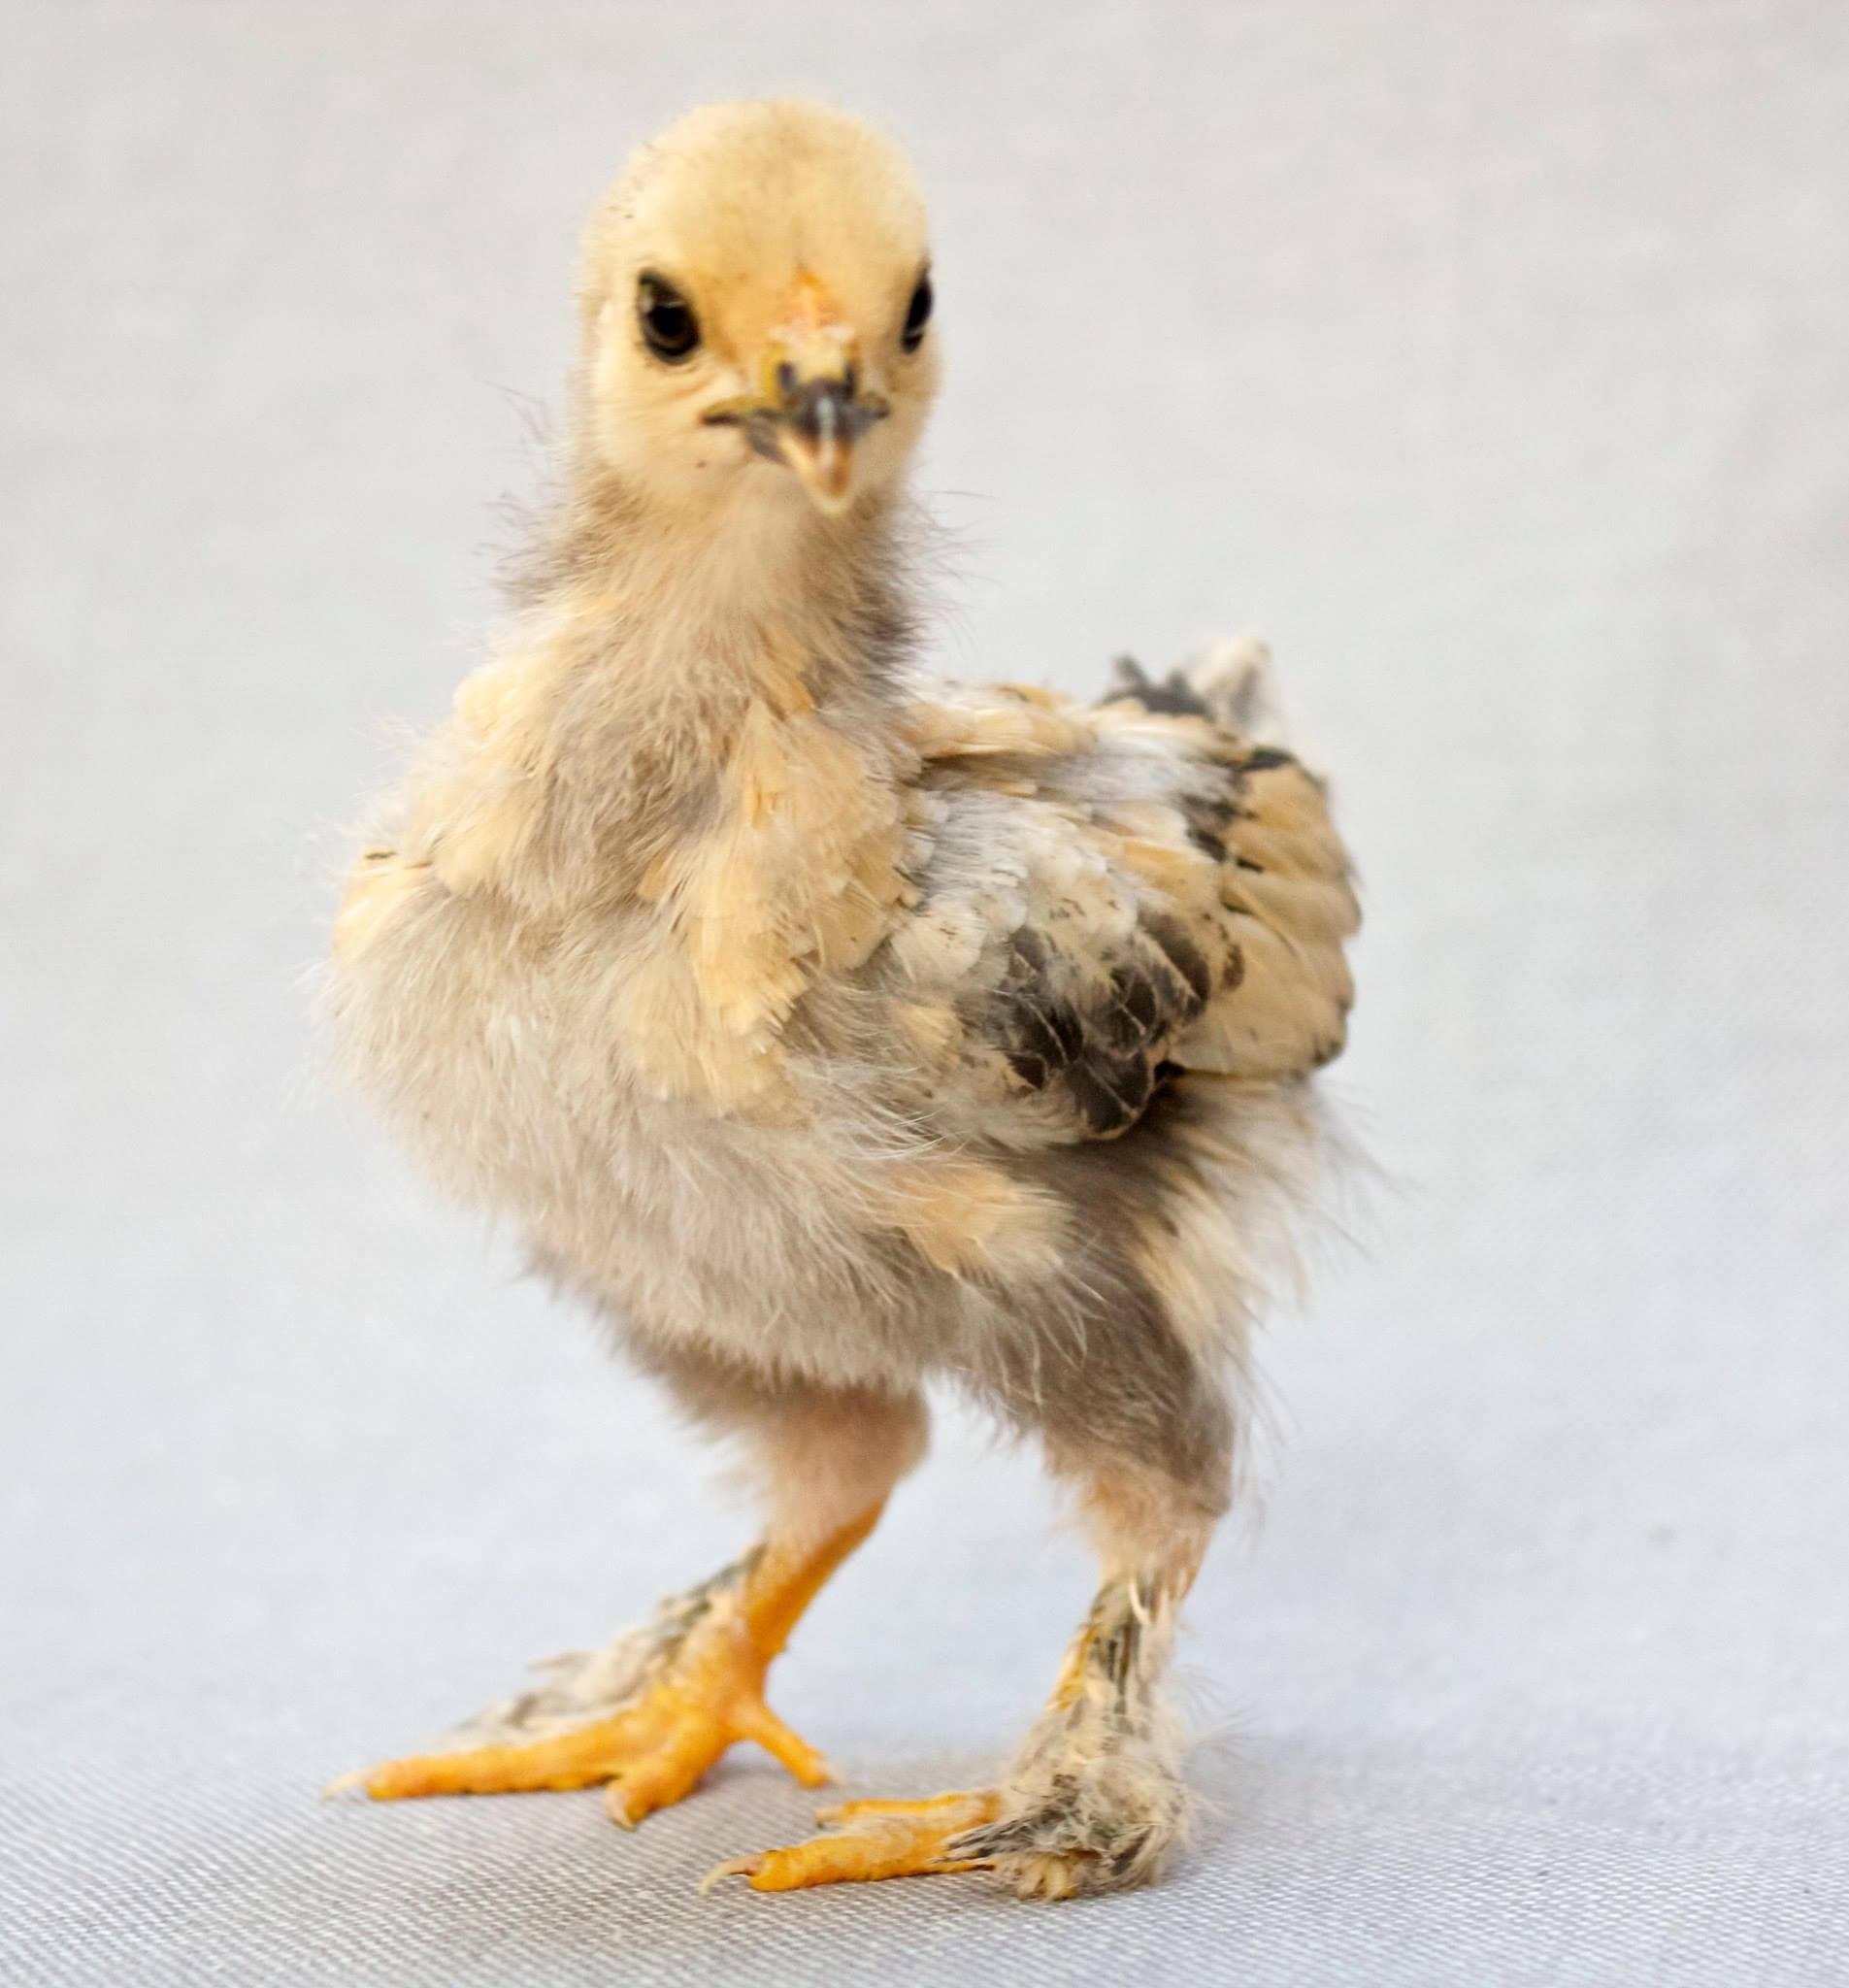 Mille Fleur D'Uccle chick, Sonya, 17 days old.